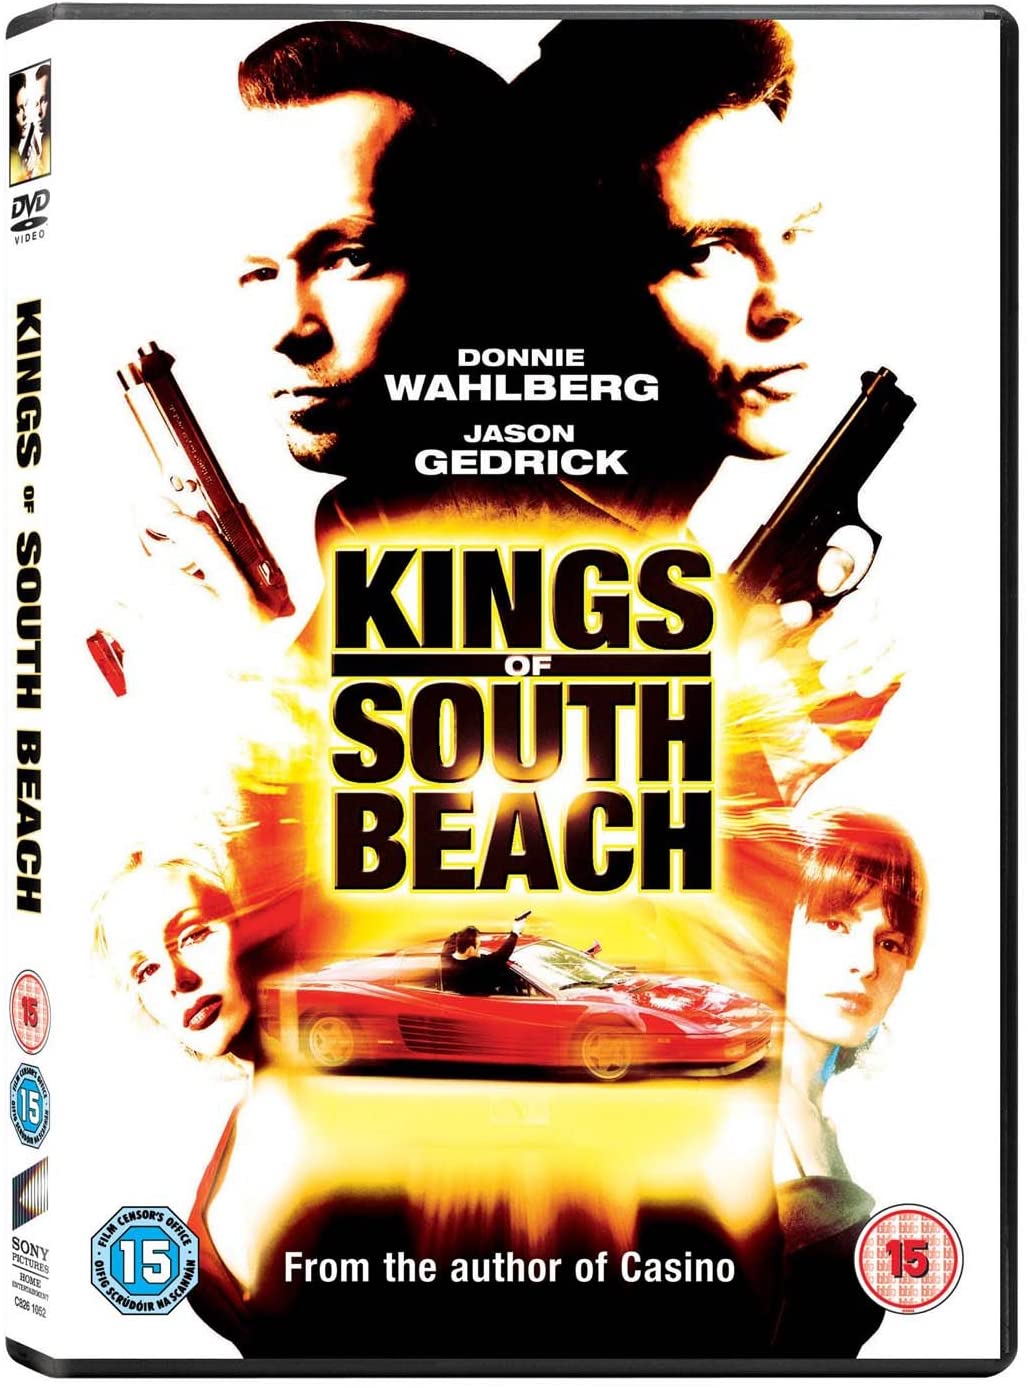 Kings Of South Beach - Crime/Television [DVD]